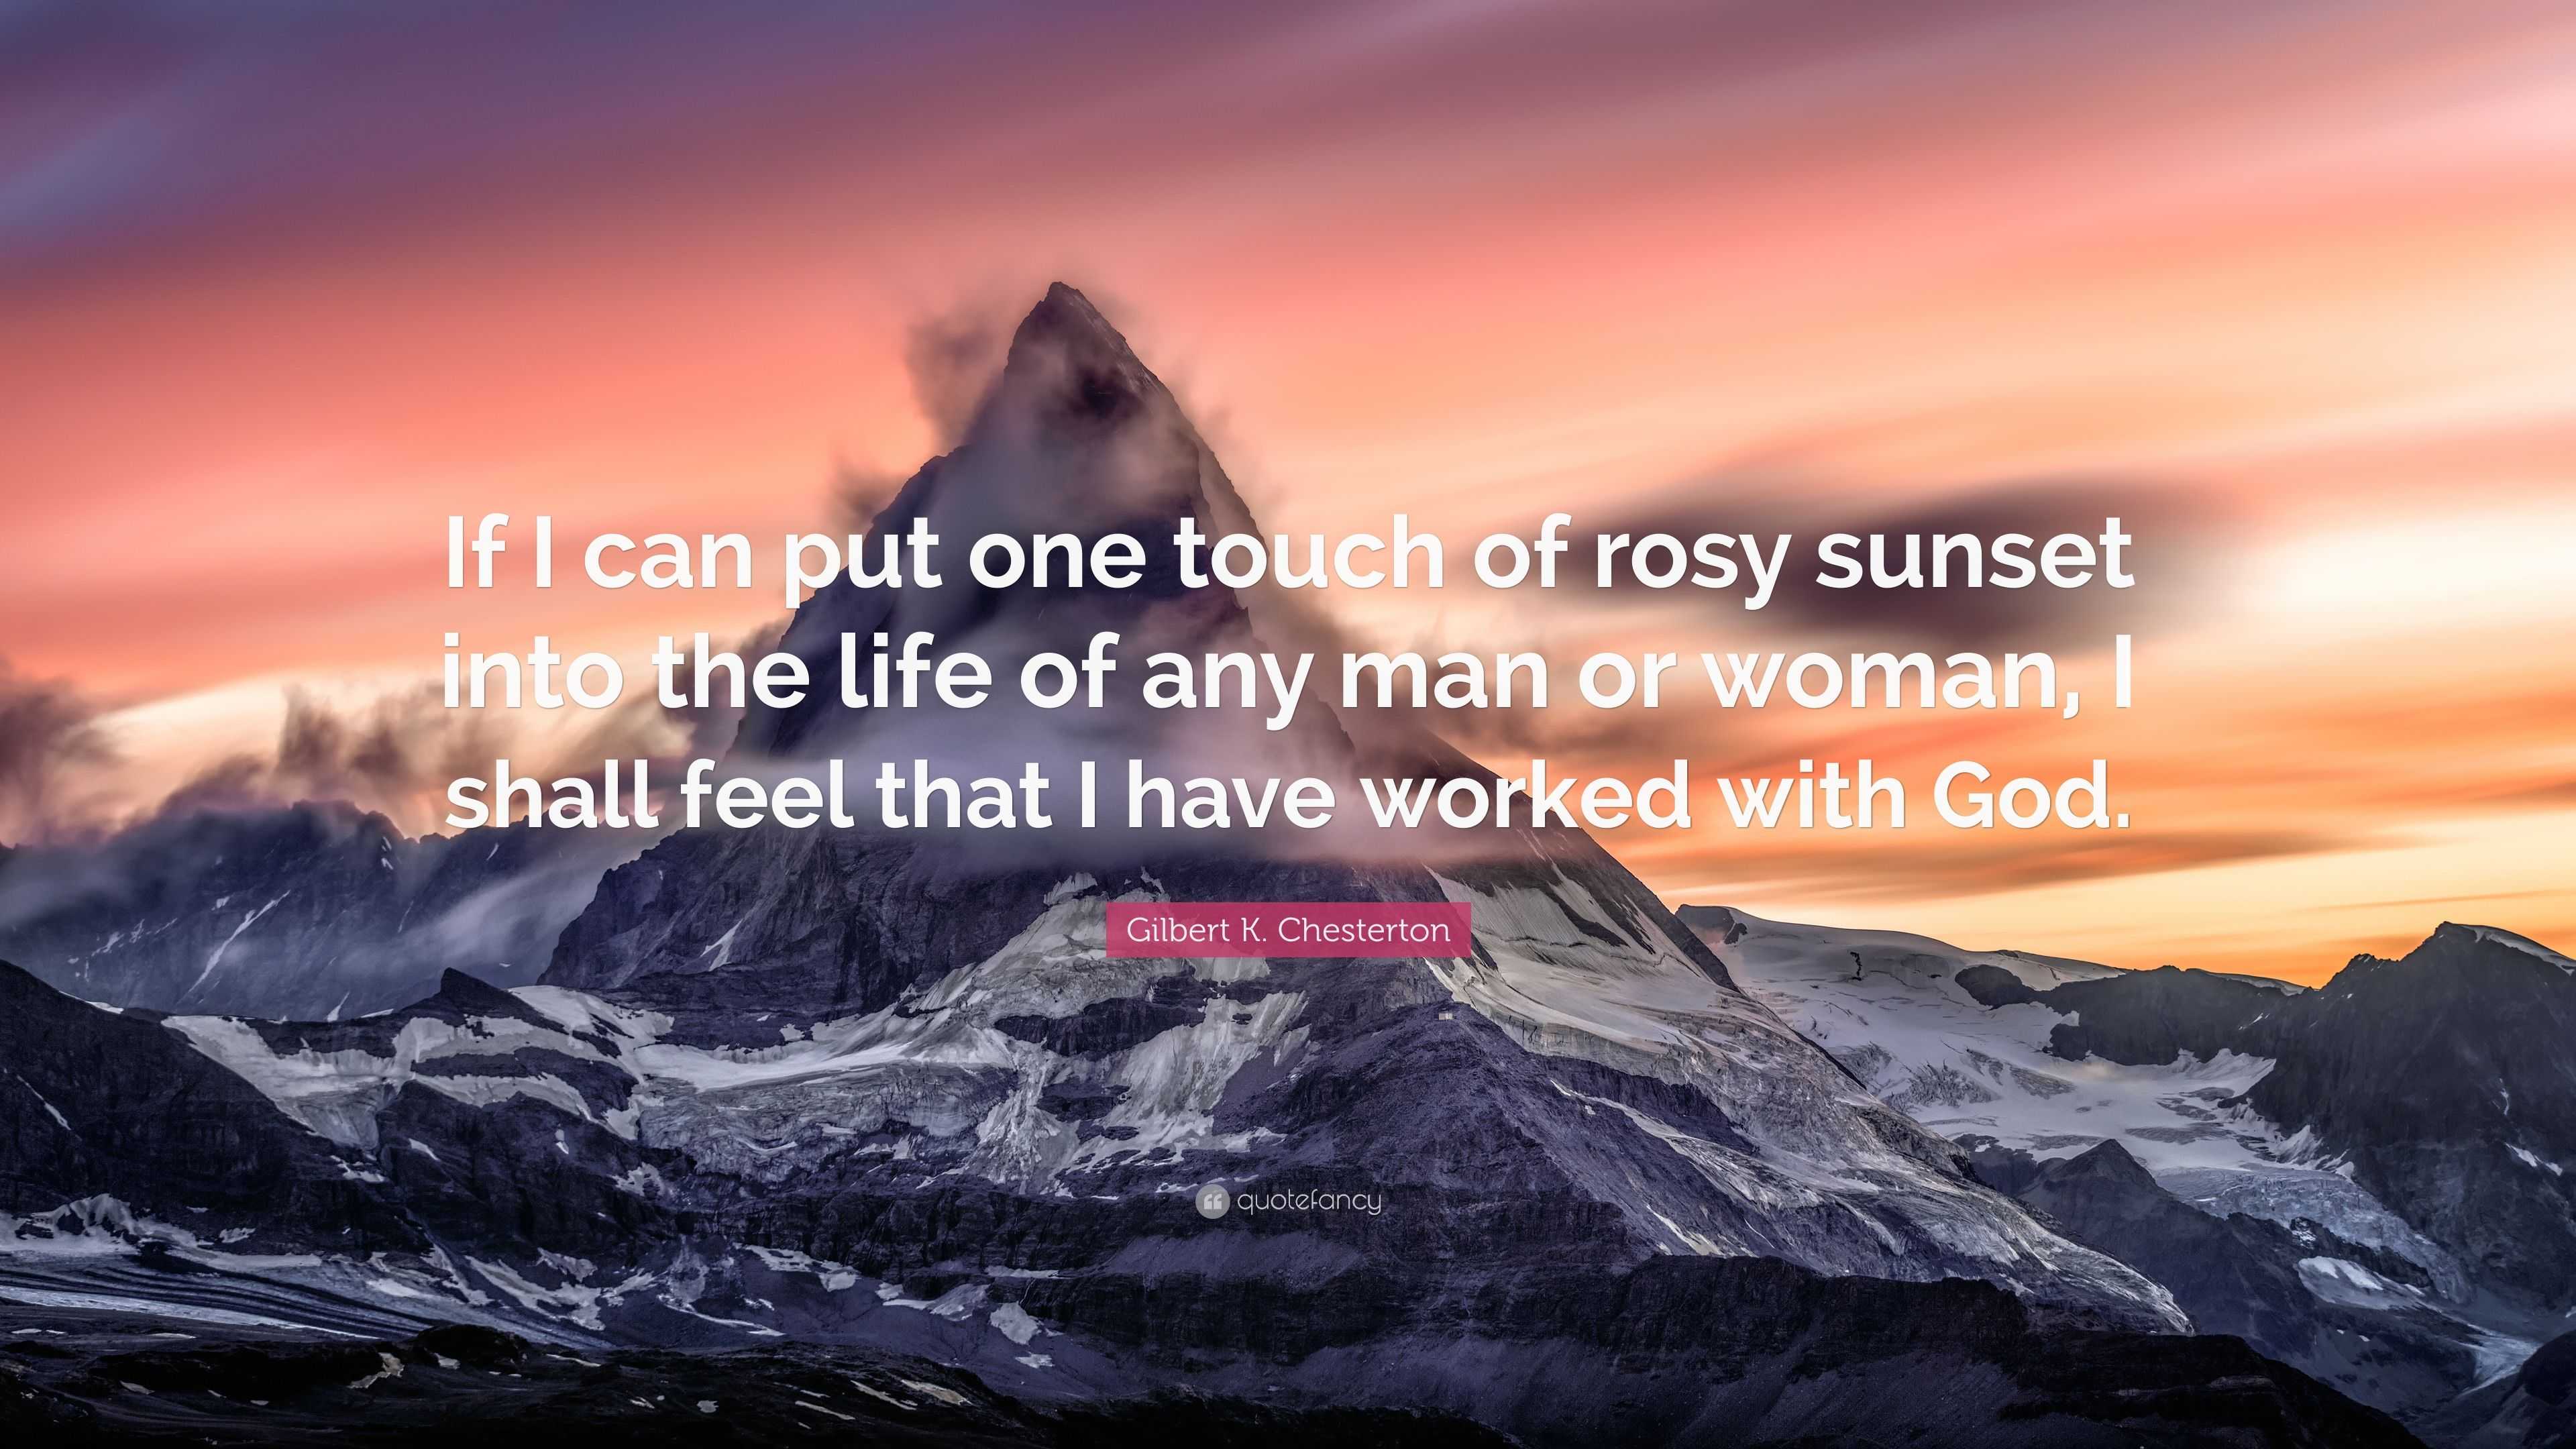 3557690-Gilbert-K-Chesterton-Quote-If-I-can-put-one-touch-of-rosy-sunset.jpg